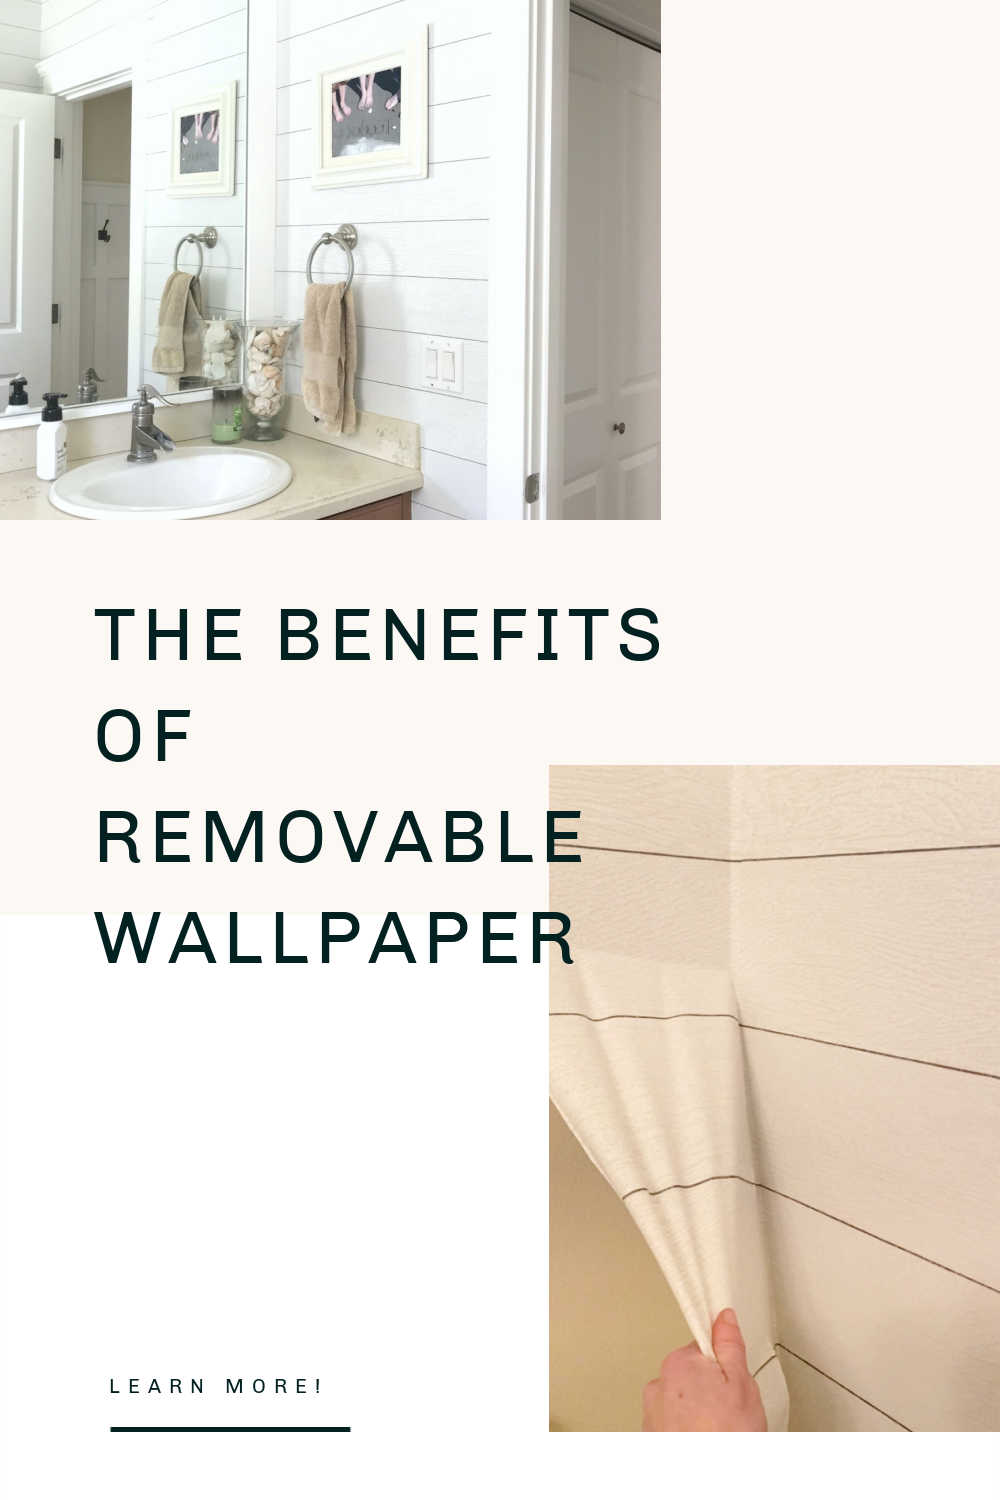 BENEFITS OF REMOVABLE WALLPAPER